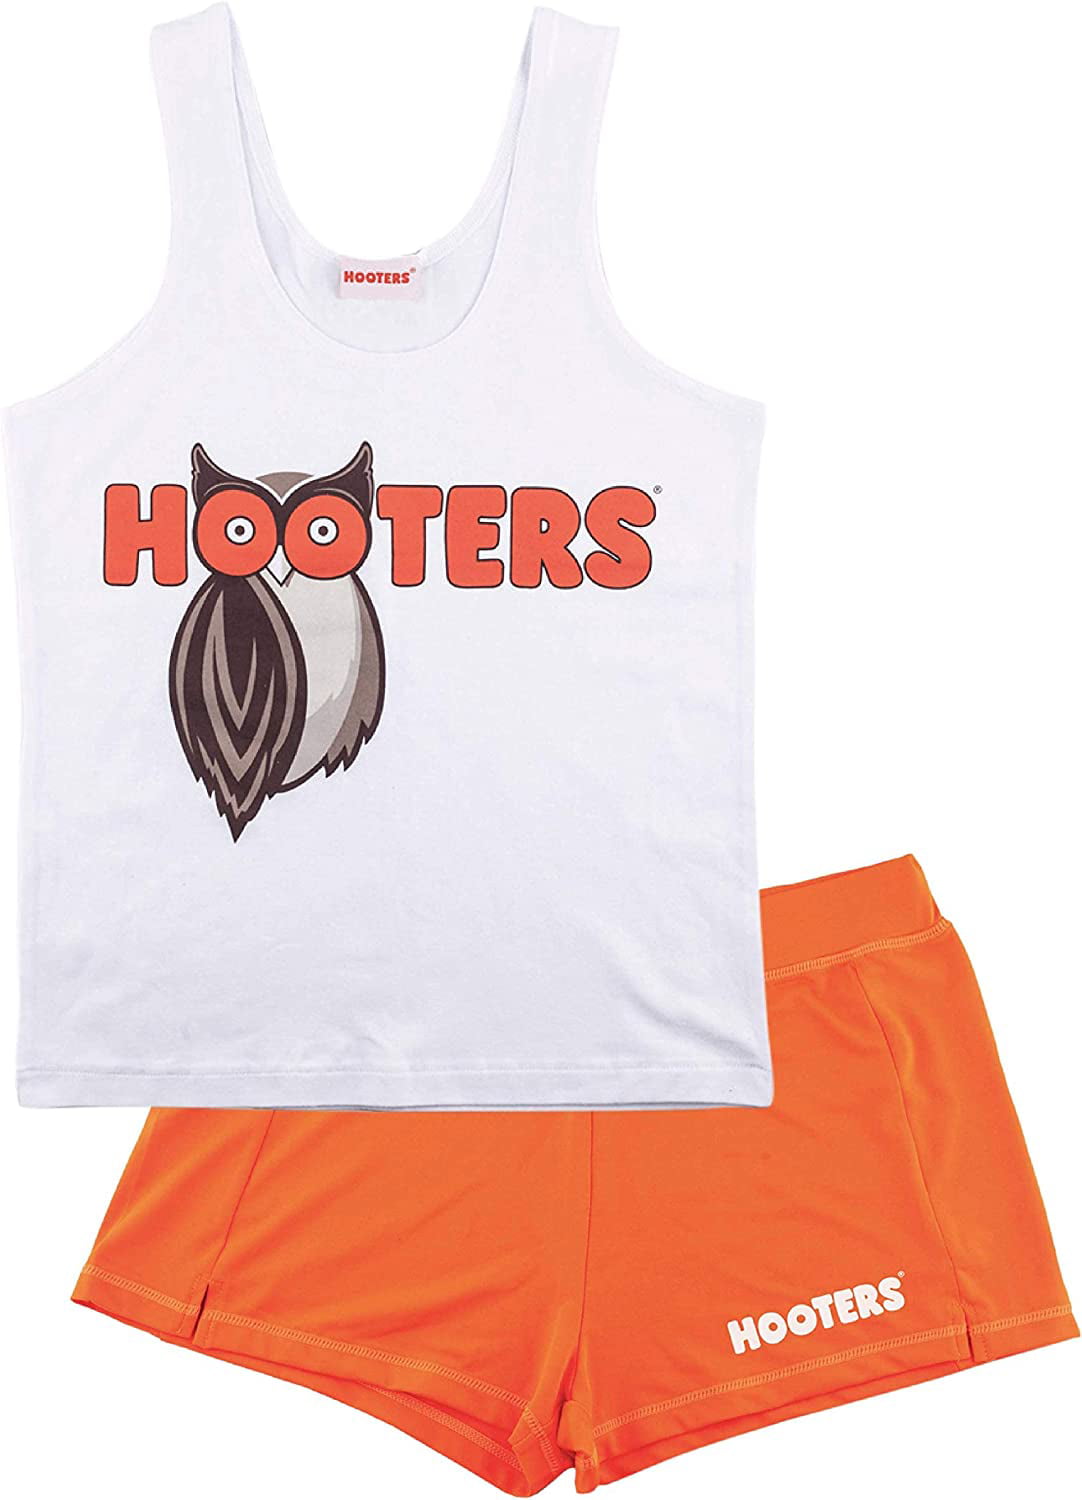 Hooters Outfit for Women Includes White Tank and Orange Short Set